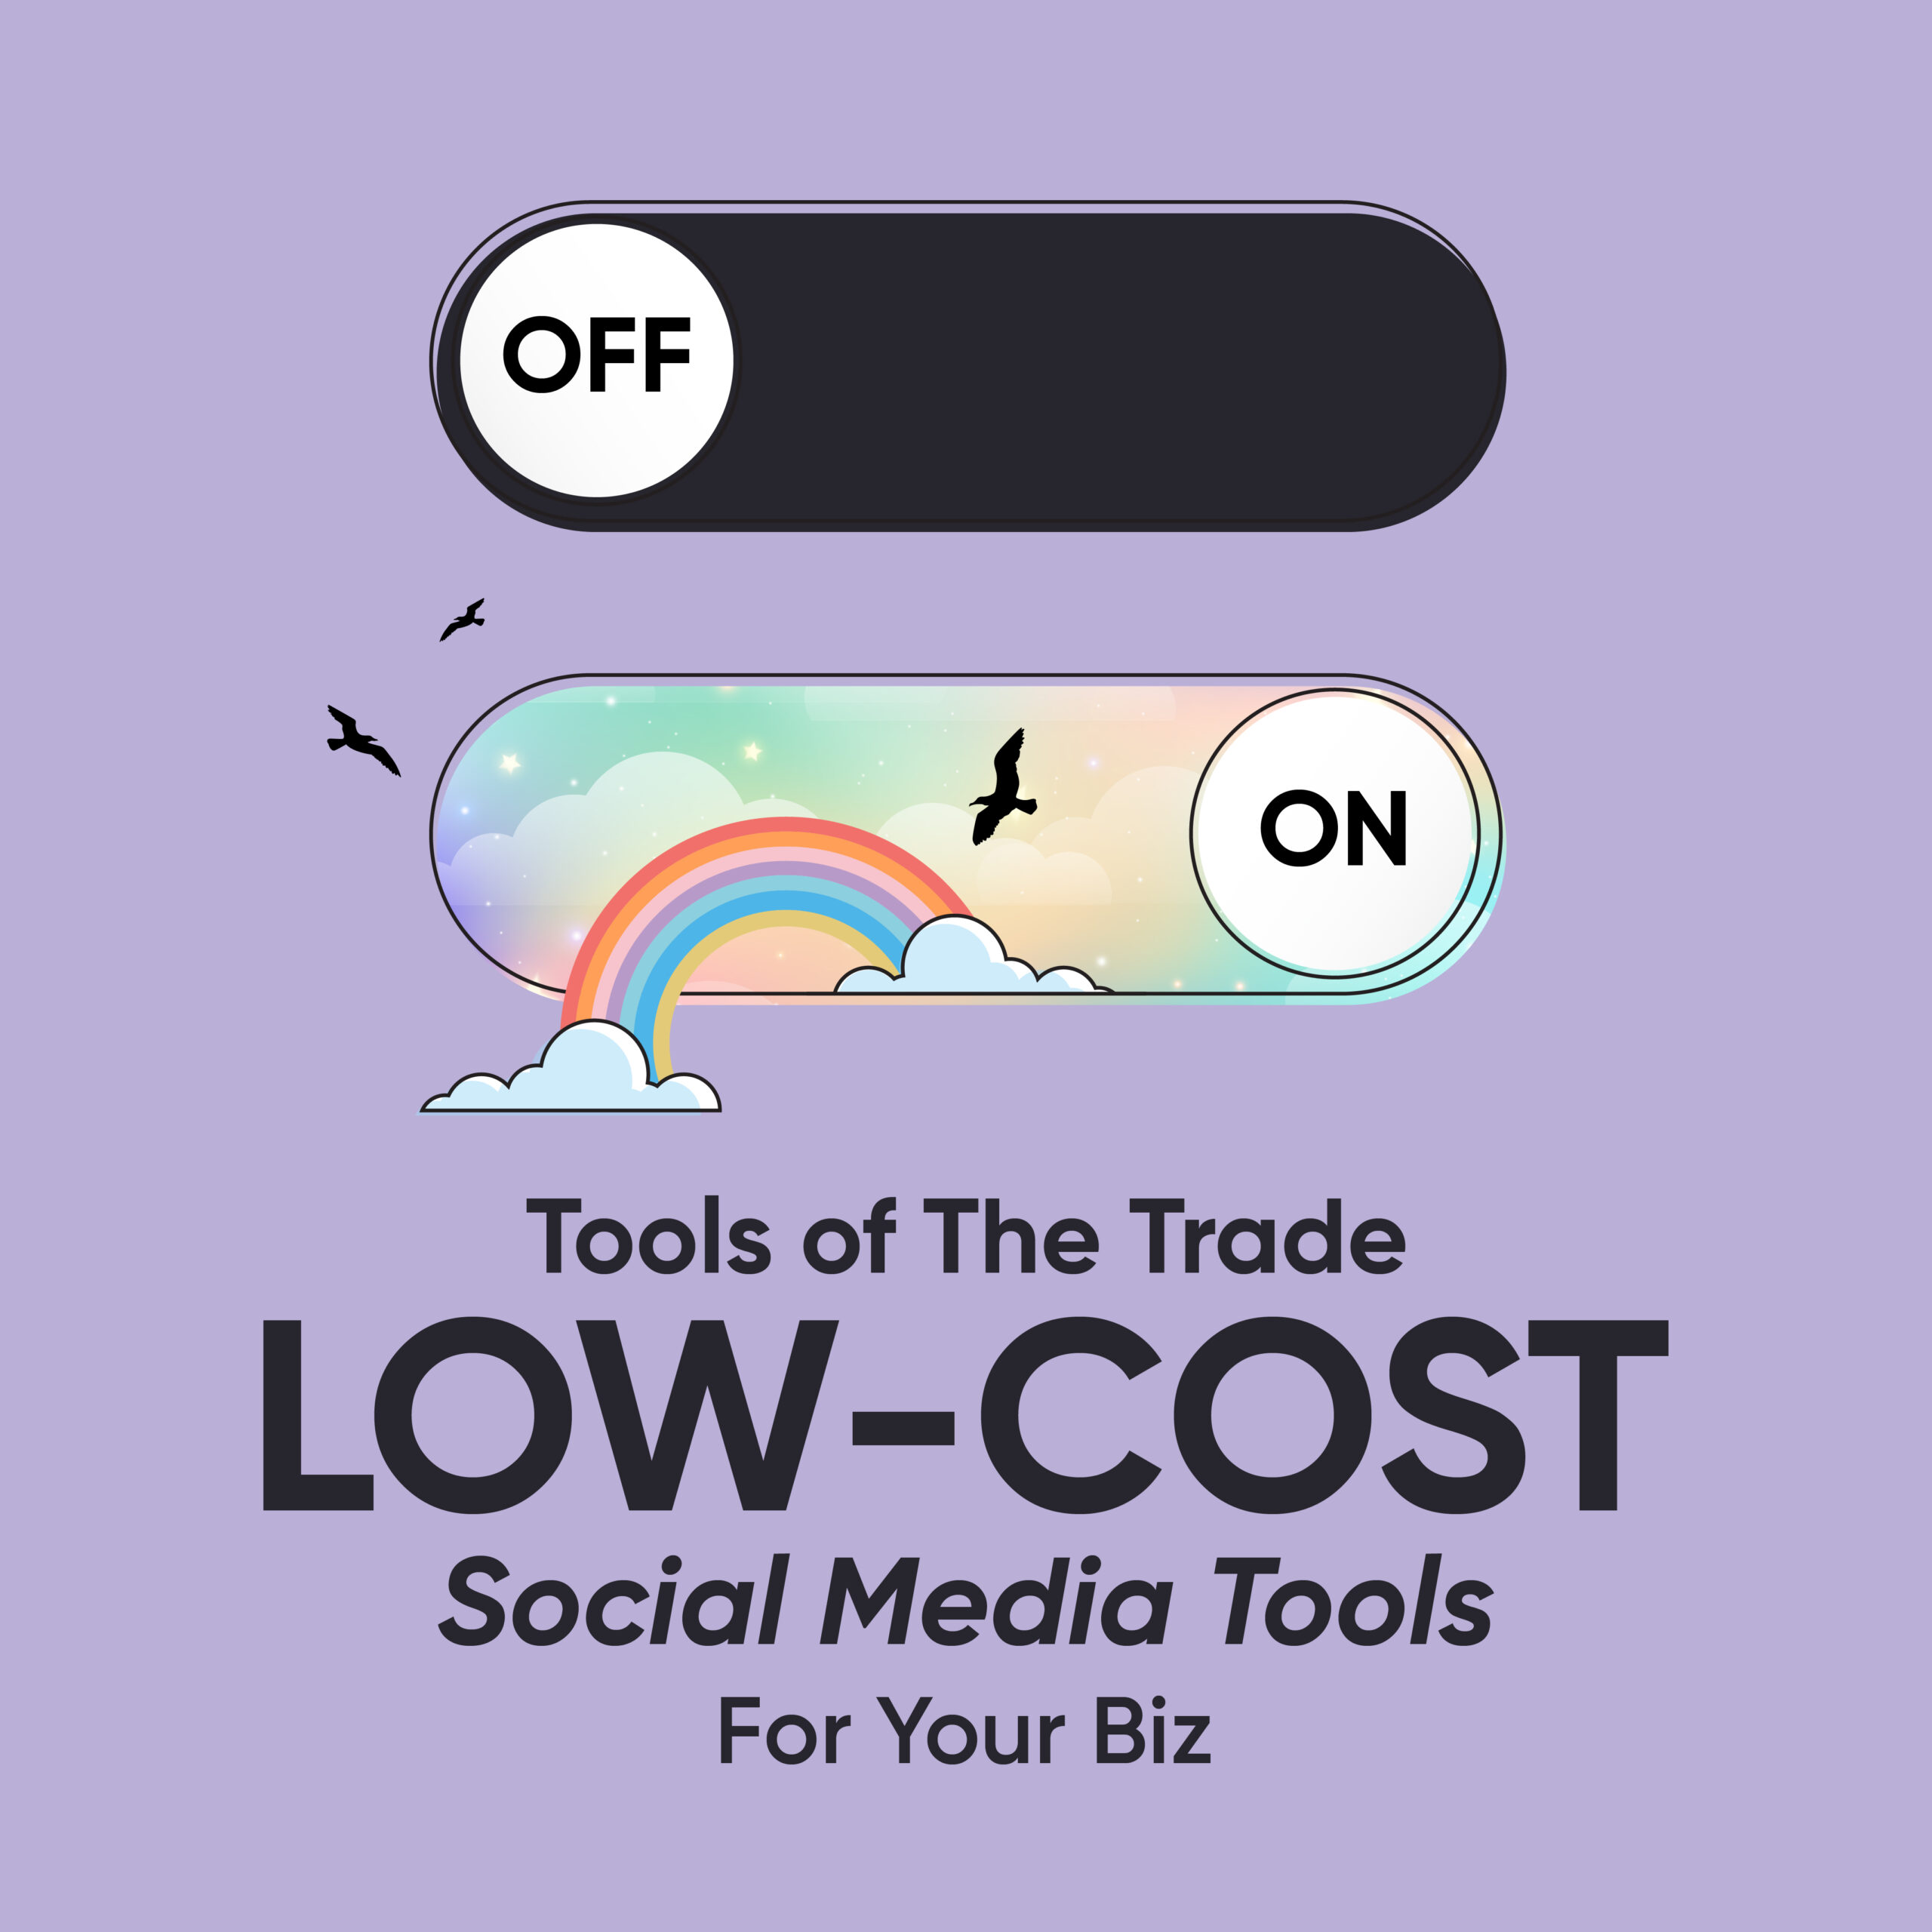 Tools for Small Businesses: Low-cost Social Media Tools For Your Biz